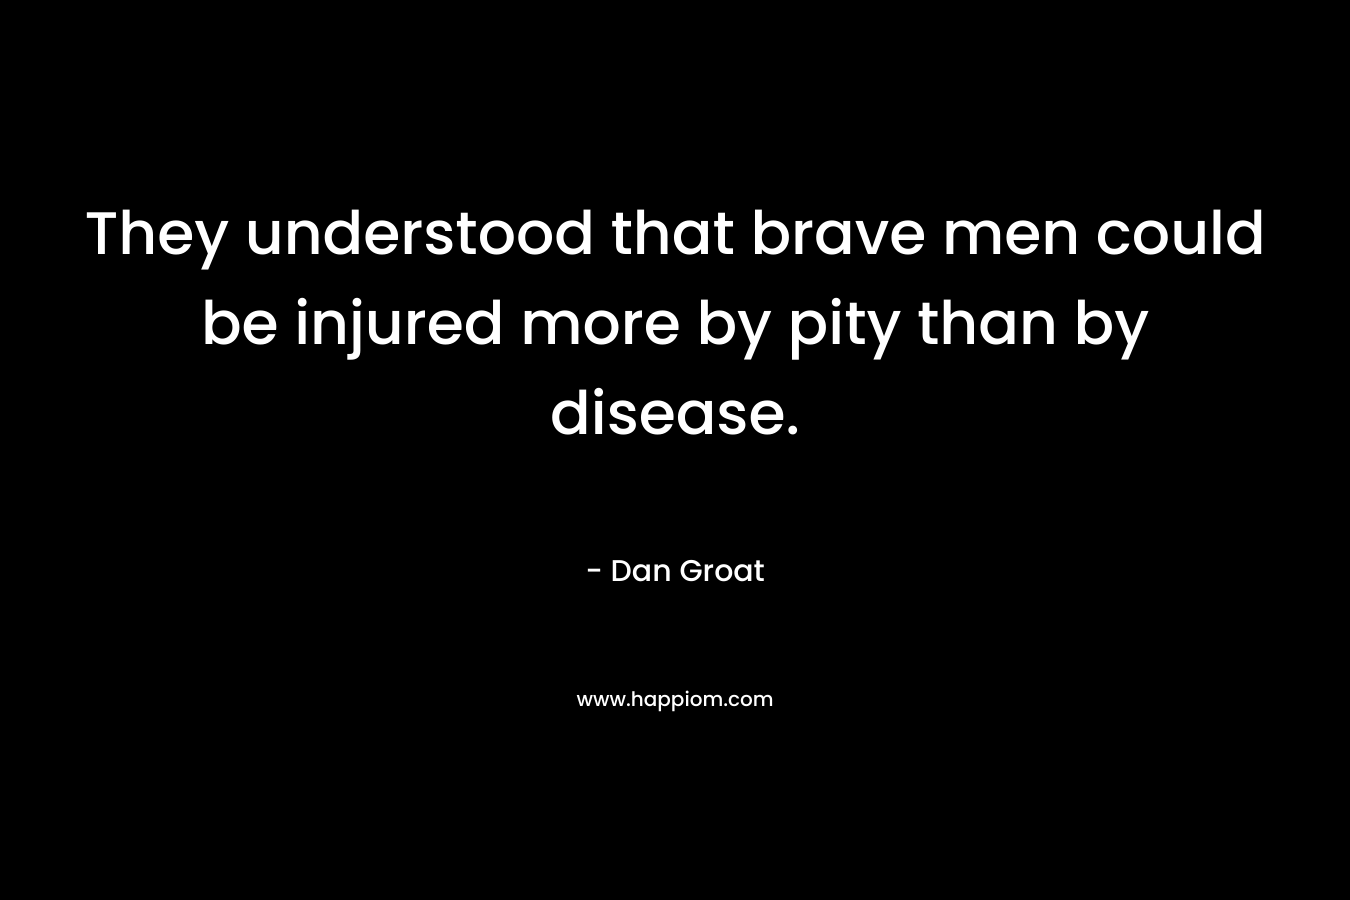 They understood that brave men could be injured more by pity than by disease.